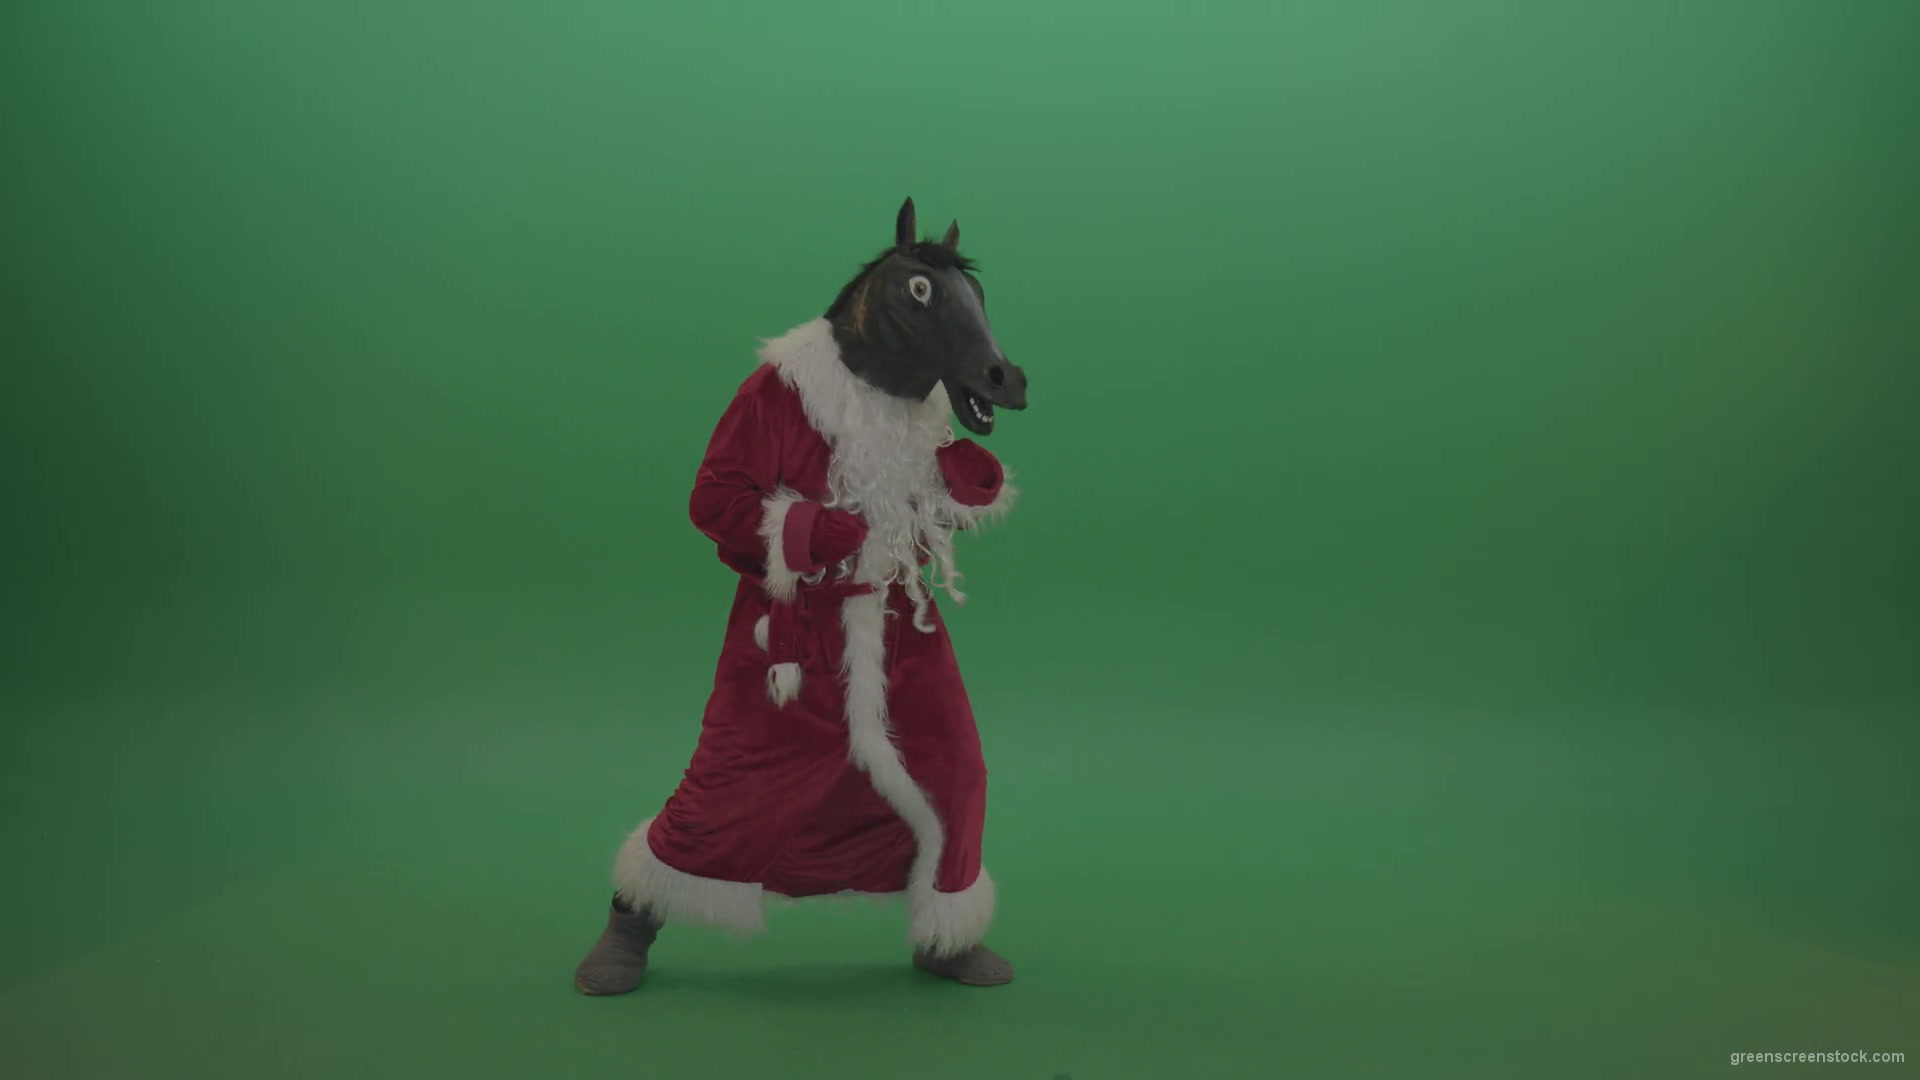 Horse-head-santa-displays-his-fight-techniques-over-chromakey-background-1920_008 Green Screen Stock